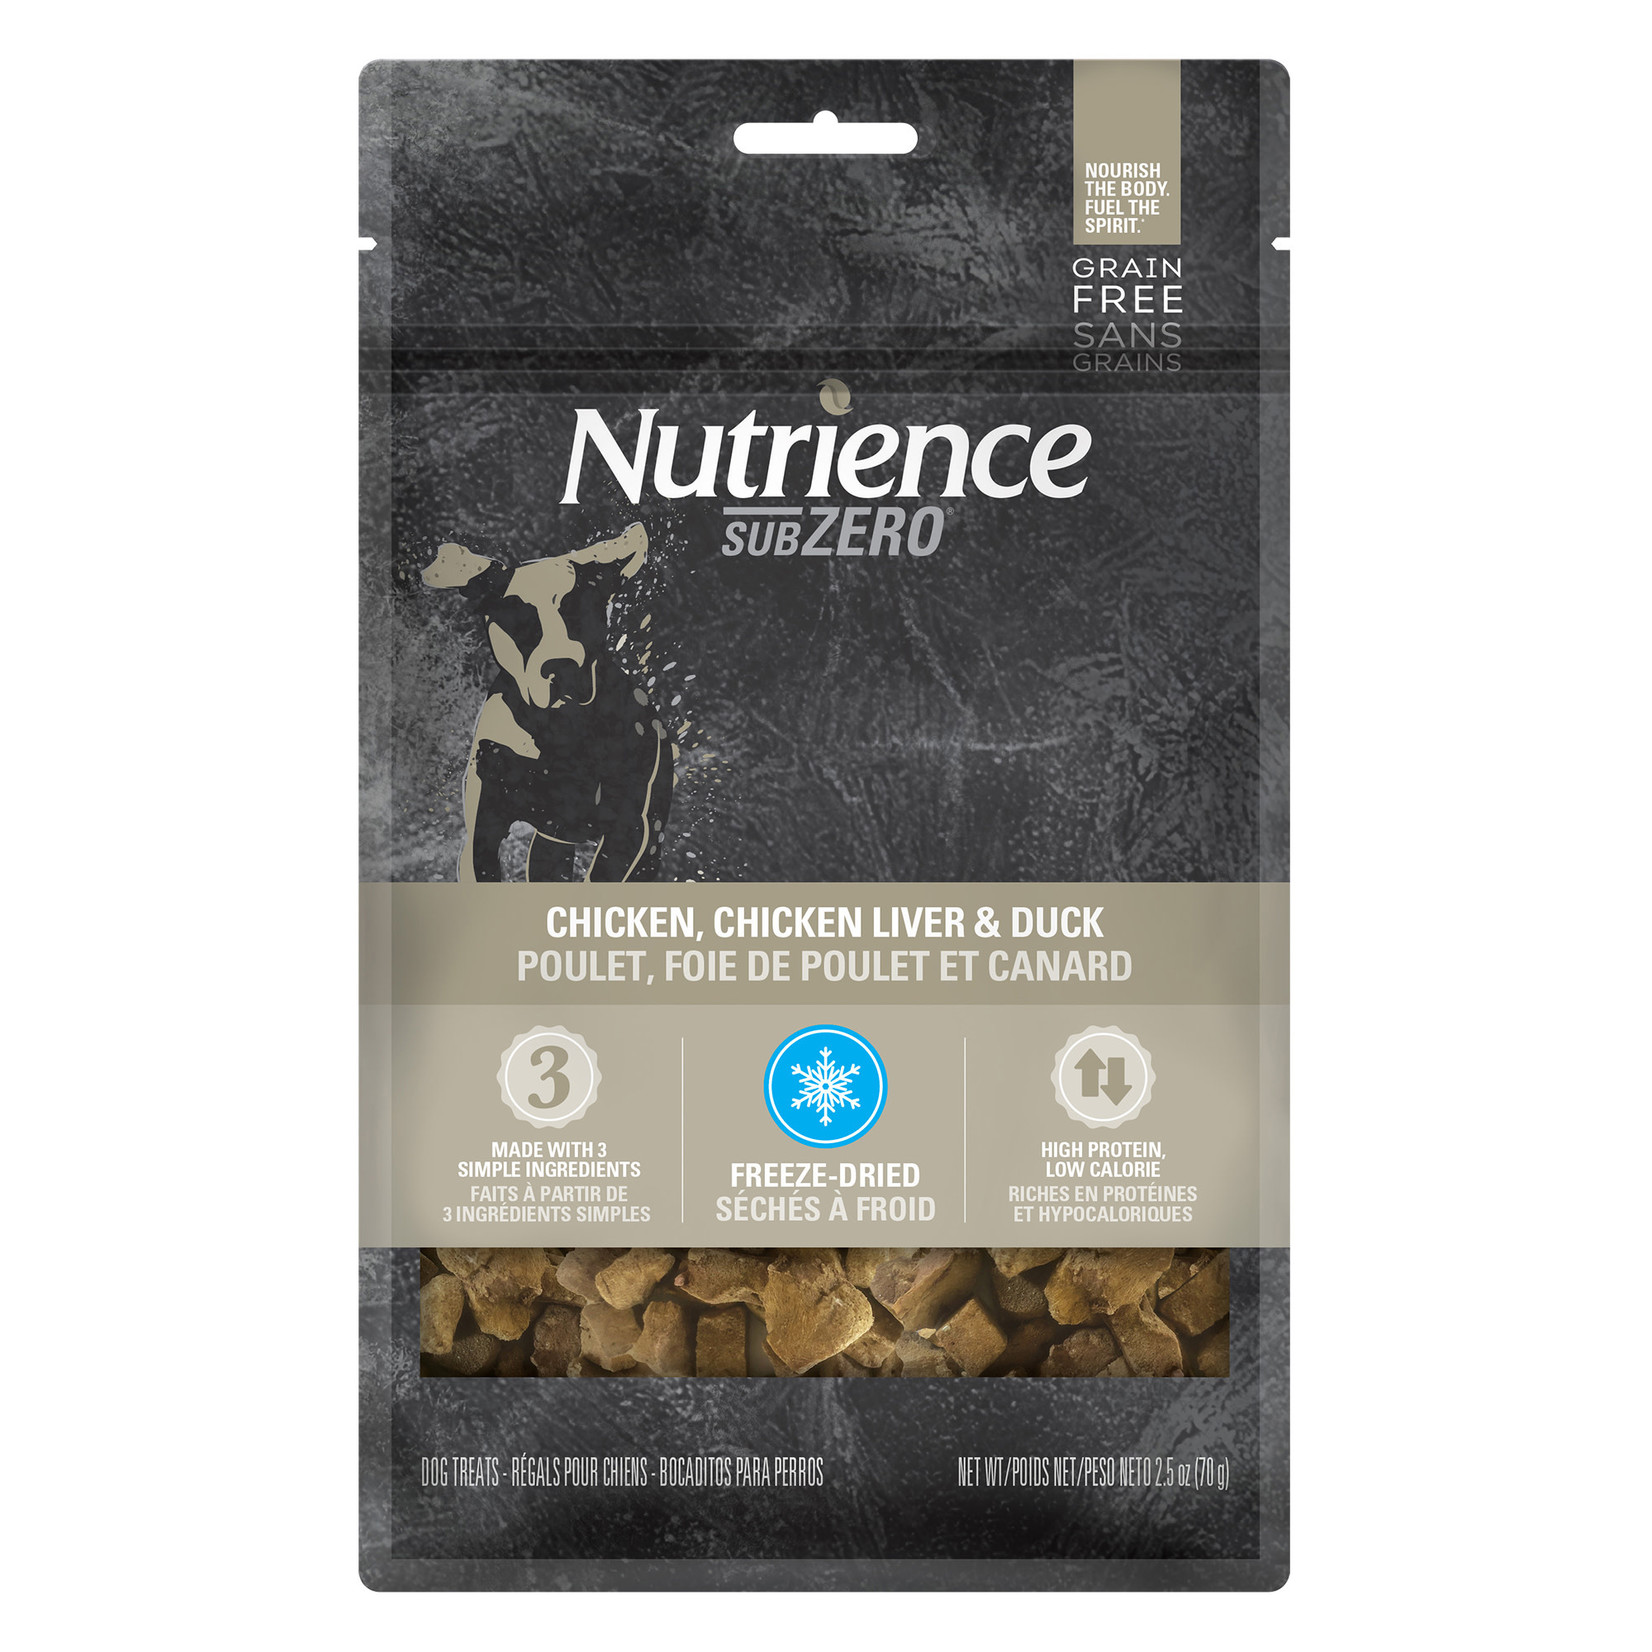 NUTRIENCE Nutrience Grain Free Subzero Freeze-Dried Fraser Valley Treats - Chicken, Chicken Liver and Duck Liver - 70 g (2.5 oz)